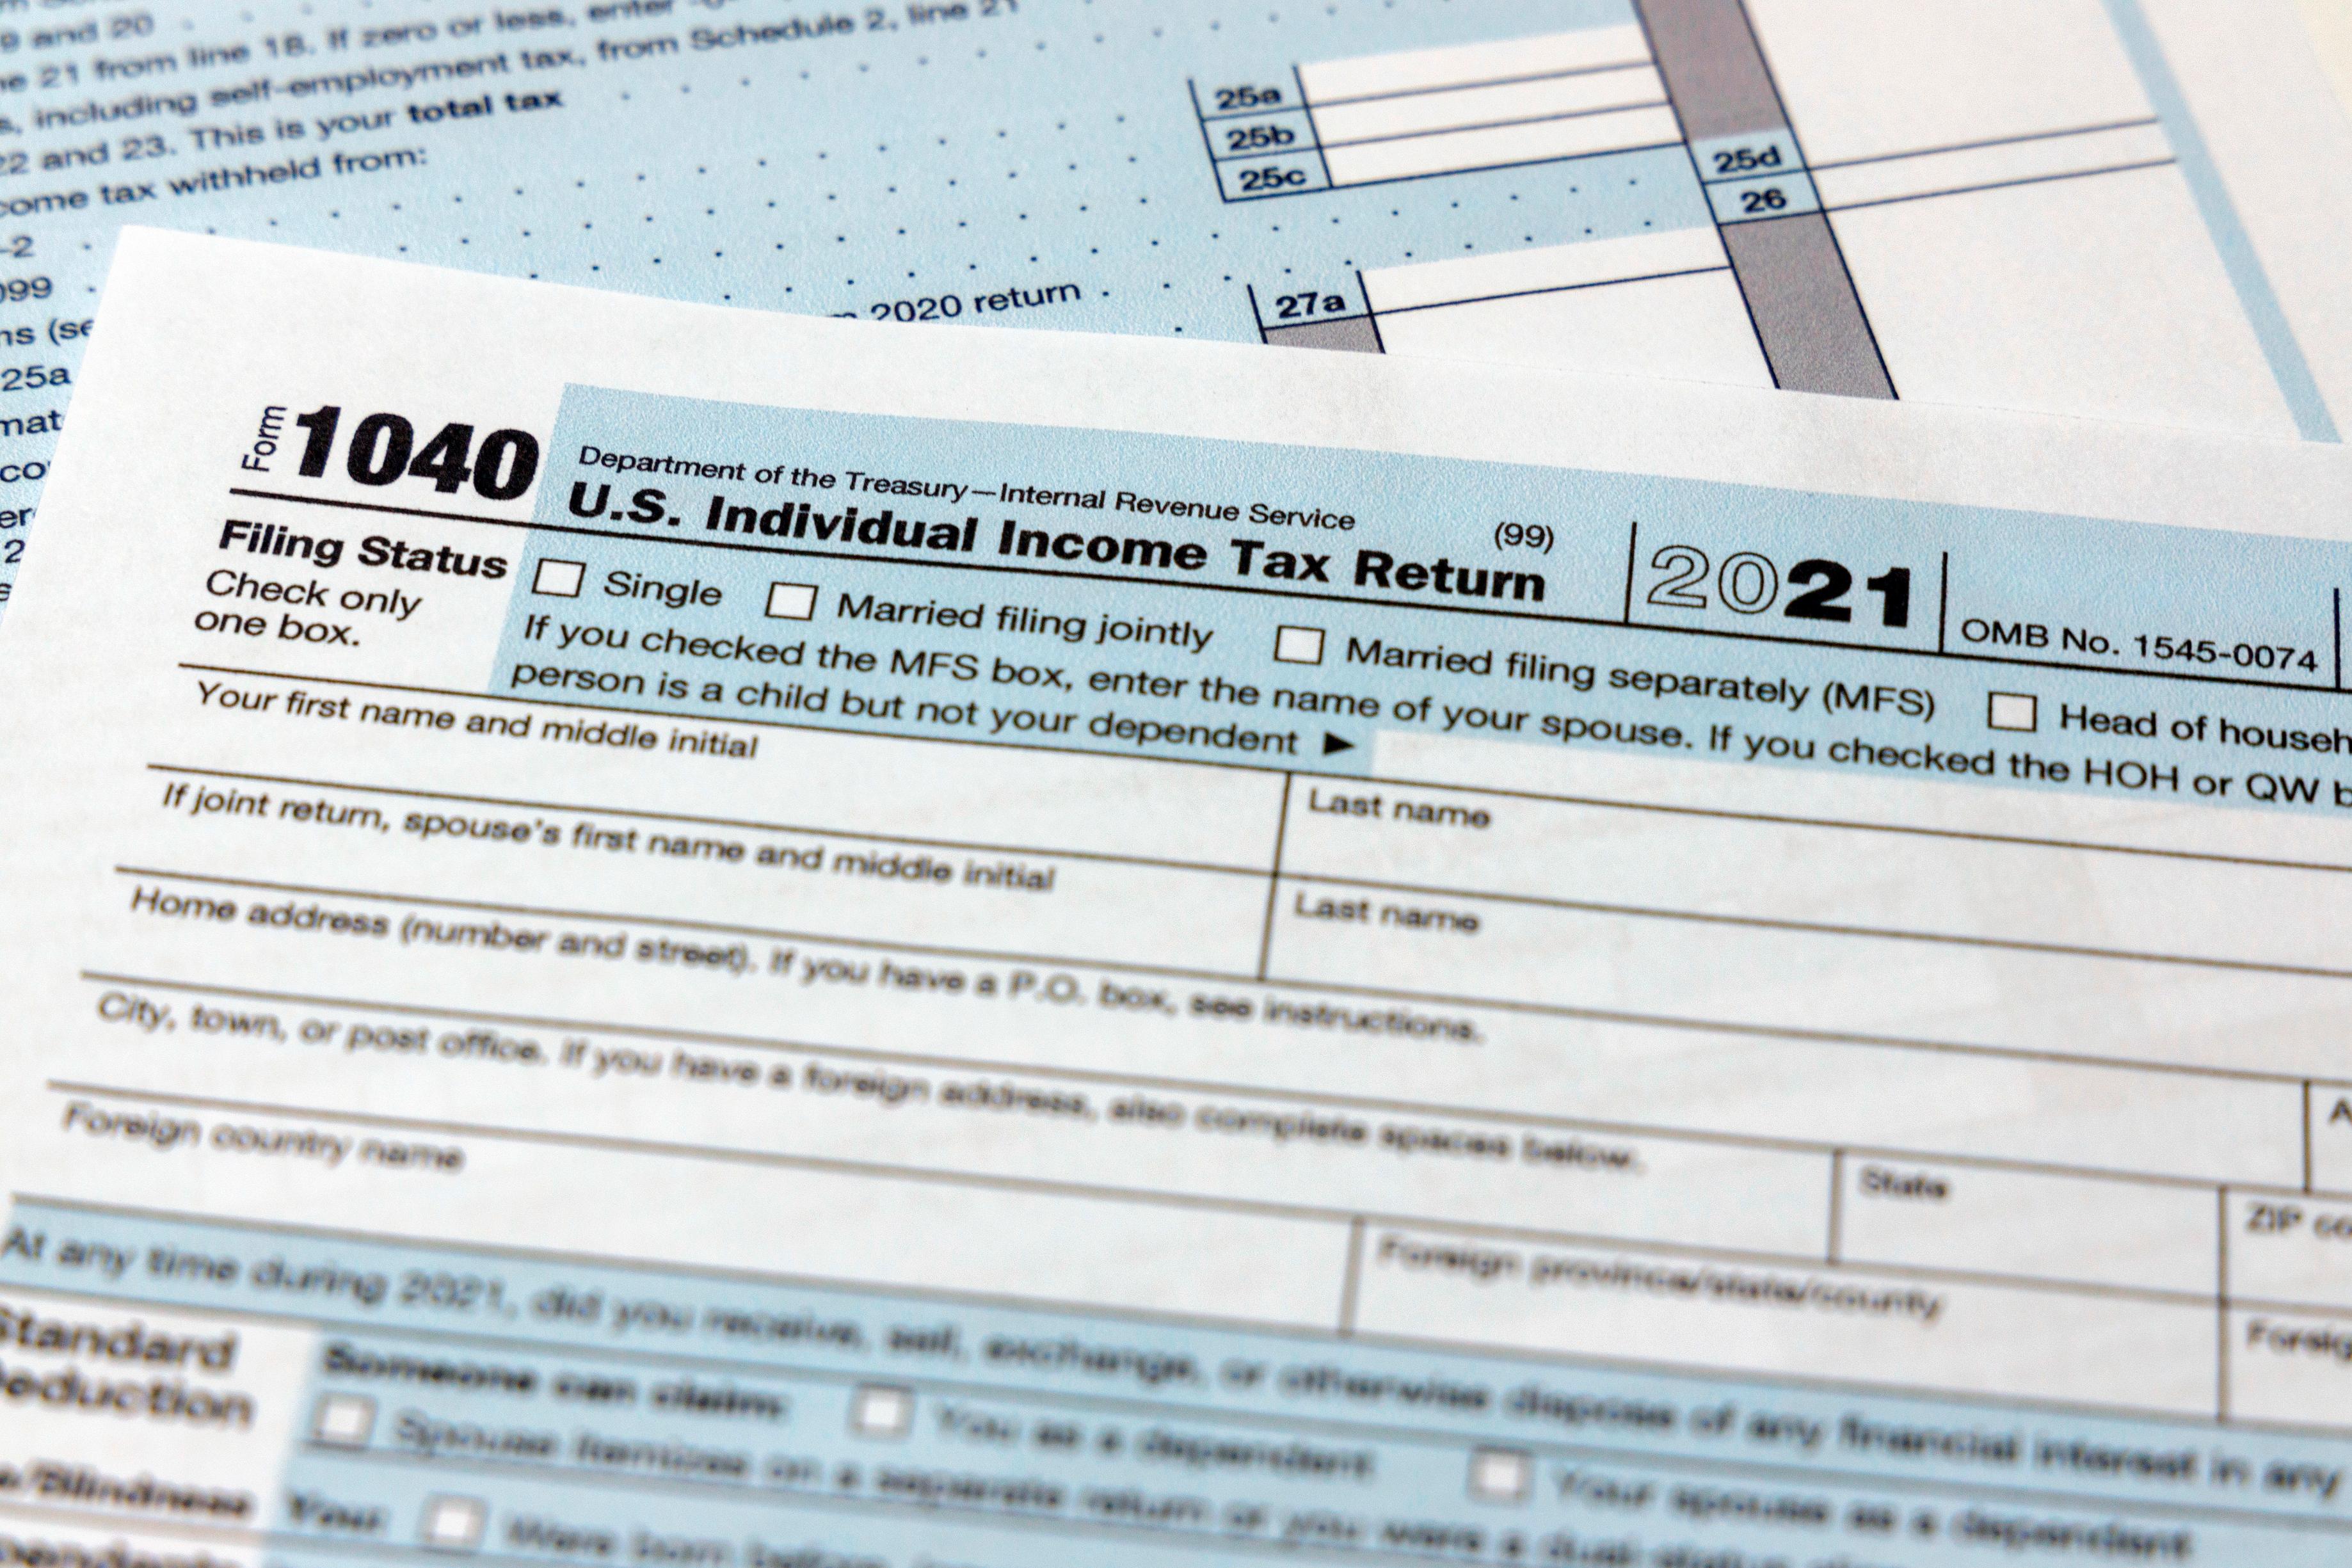 Today is Tax Day. Here’s what you need to know about filing your 2021